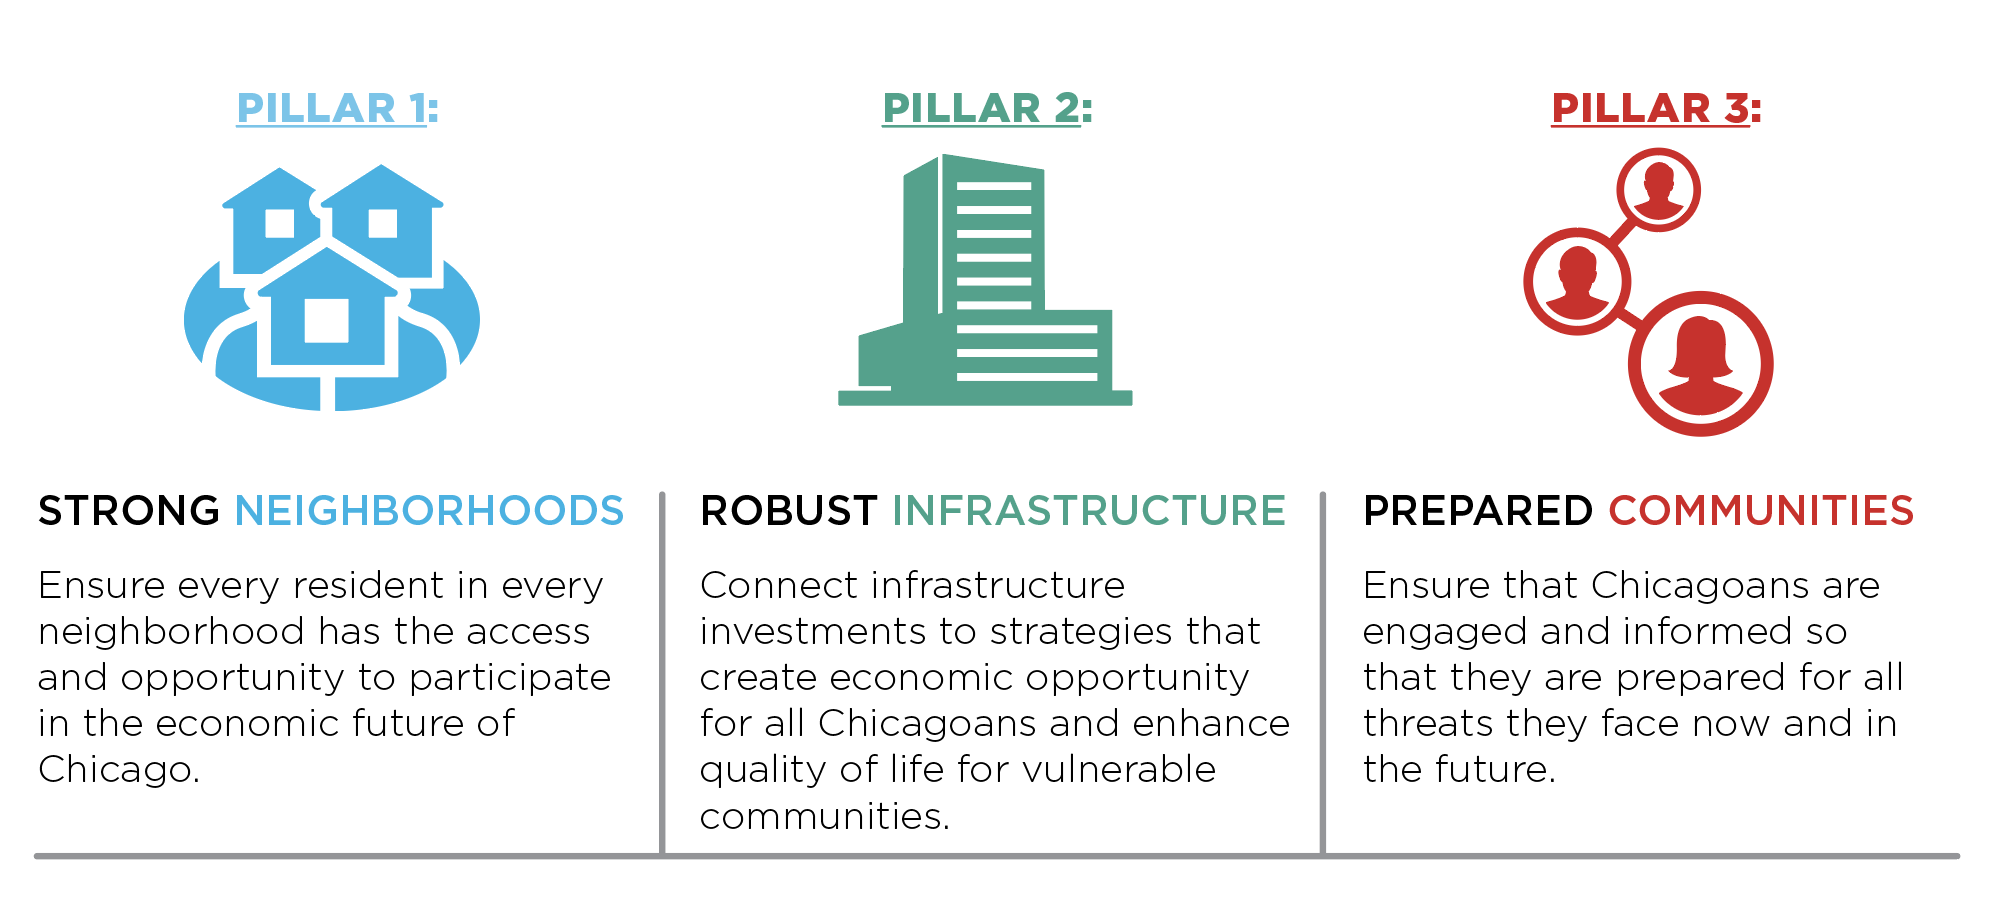 The three pillars of Chicago resilience are: